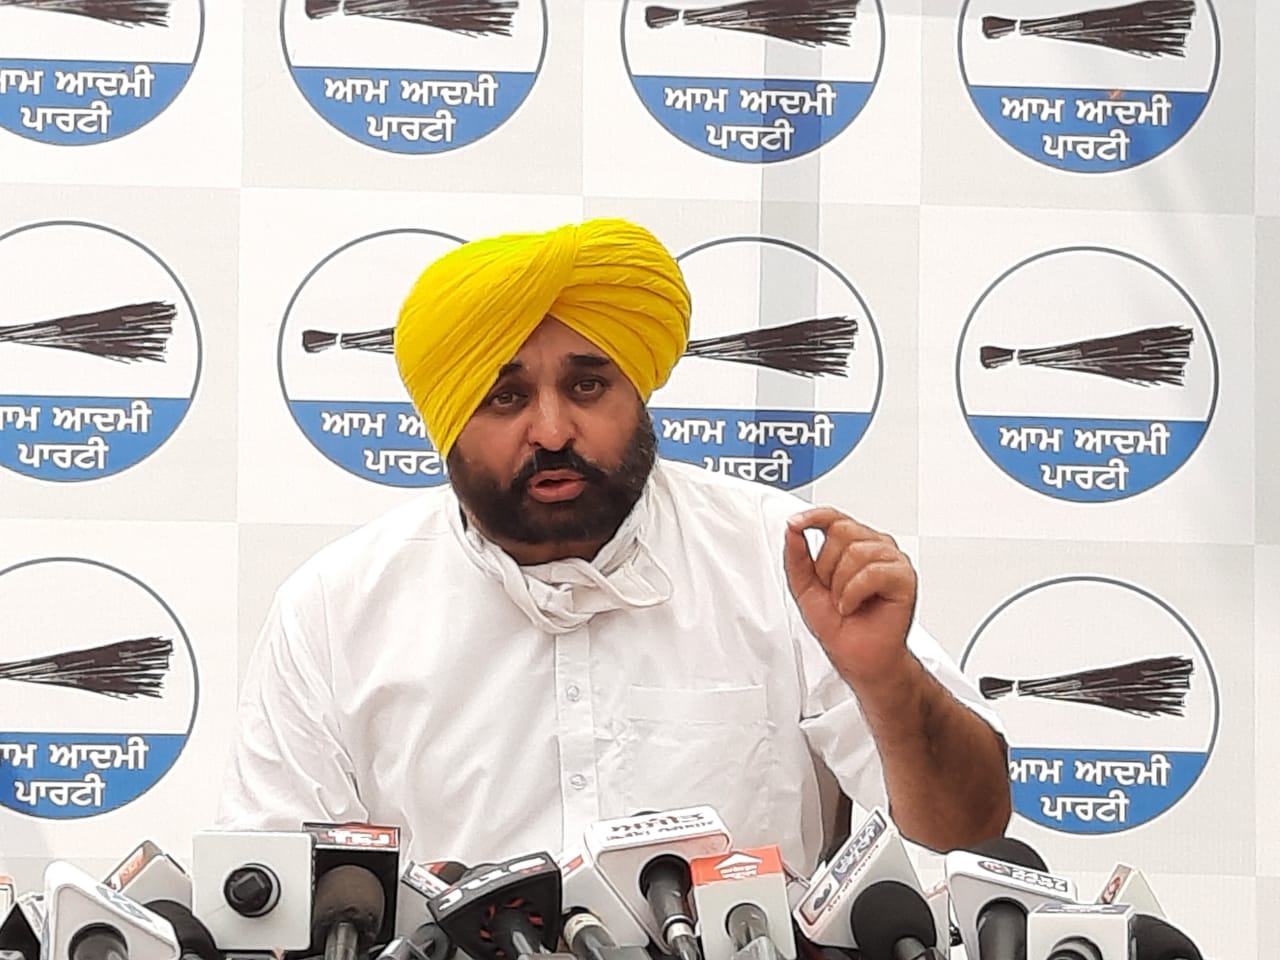 In next 25 years, Punjabi’s to pay Rs 2.25 lakh crore to private power companies: Mann